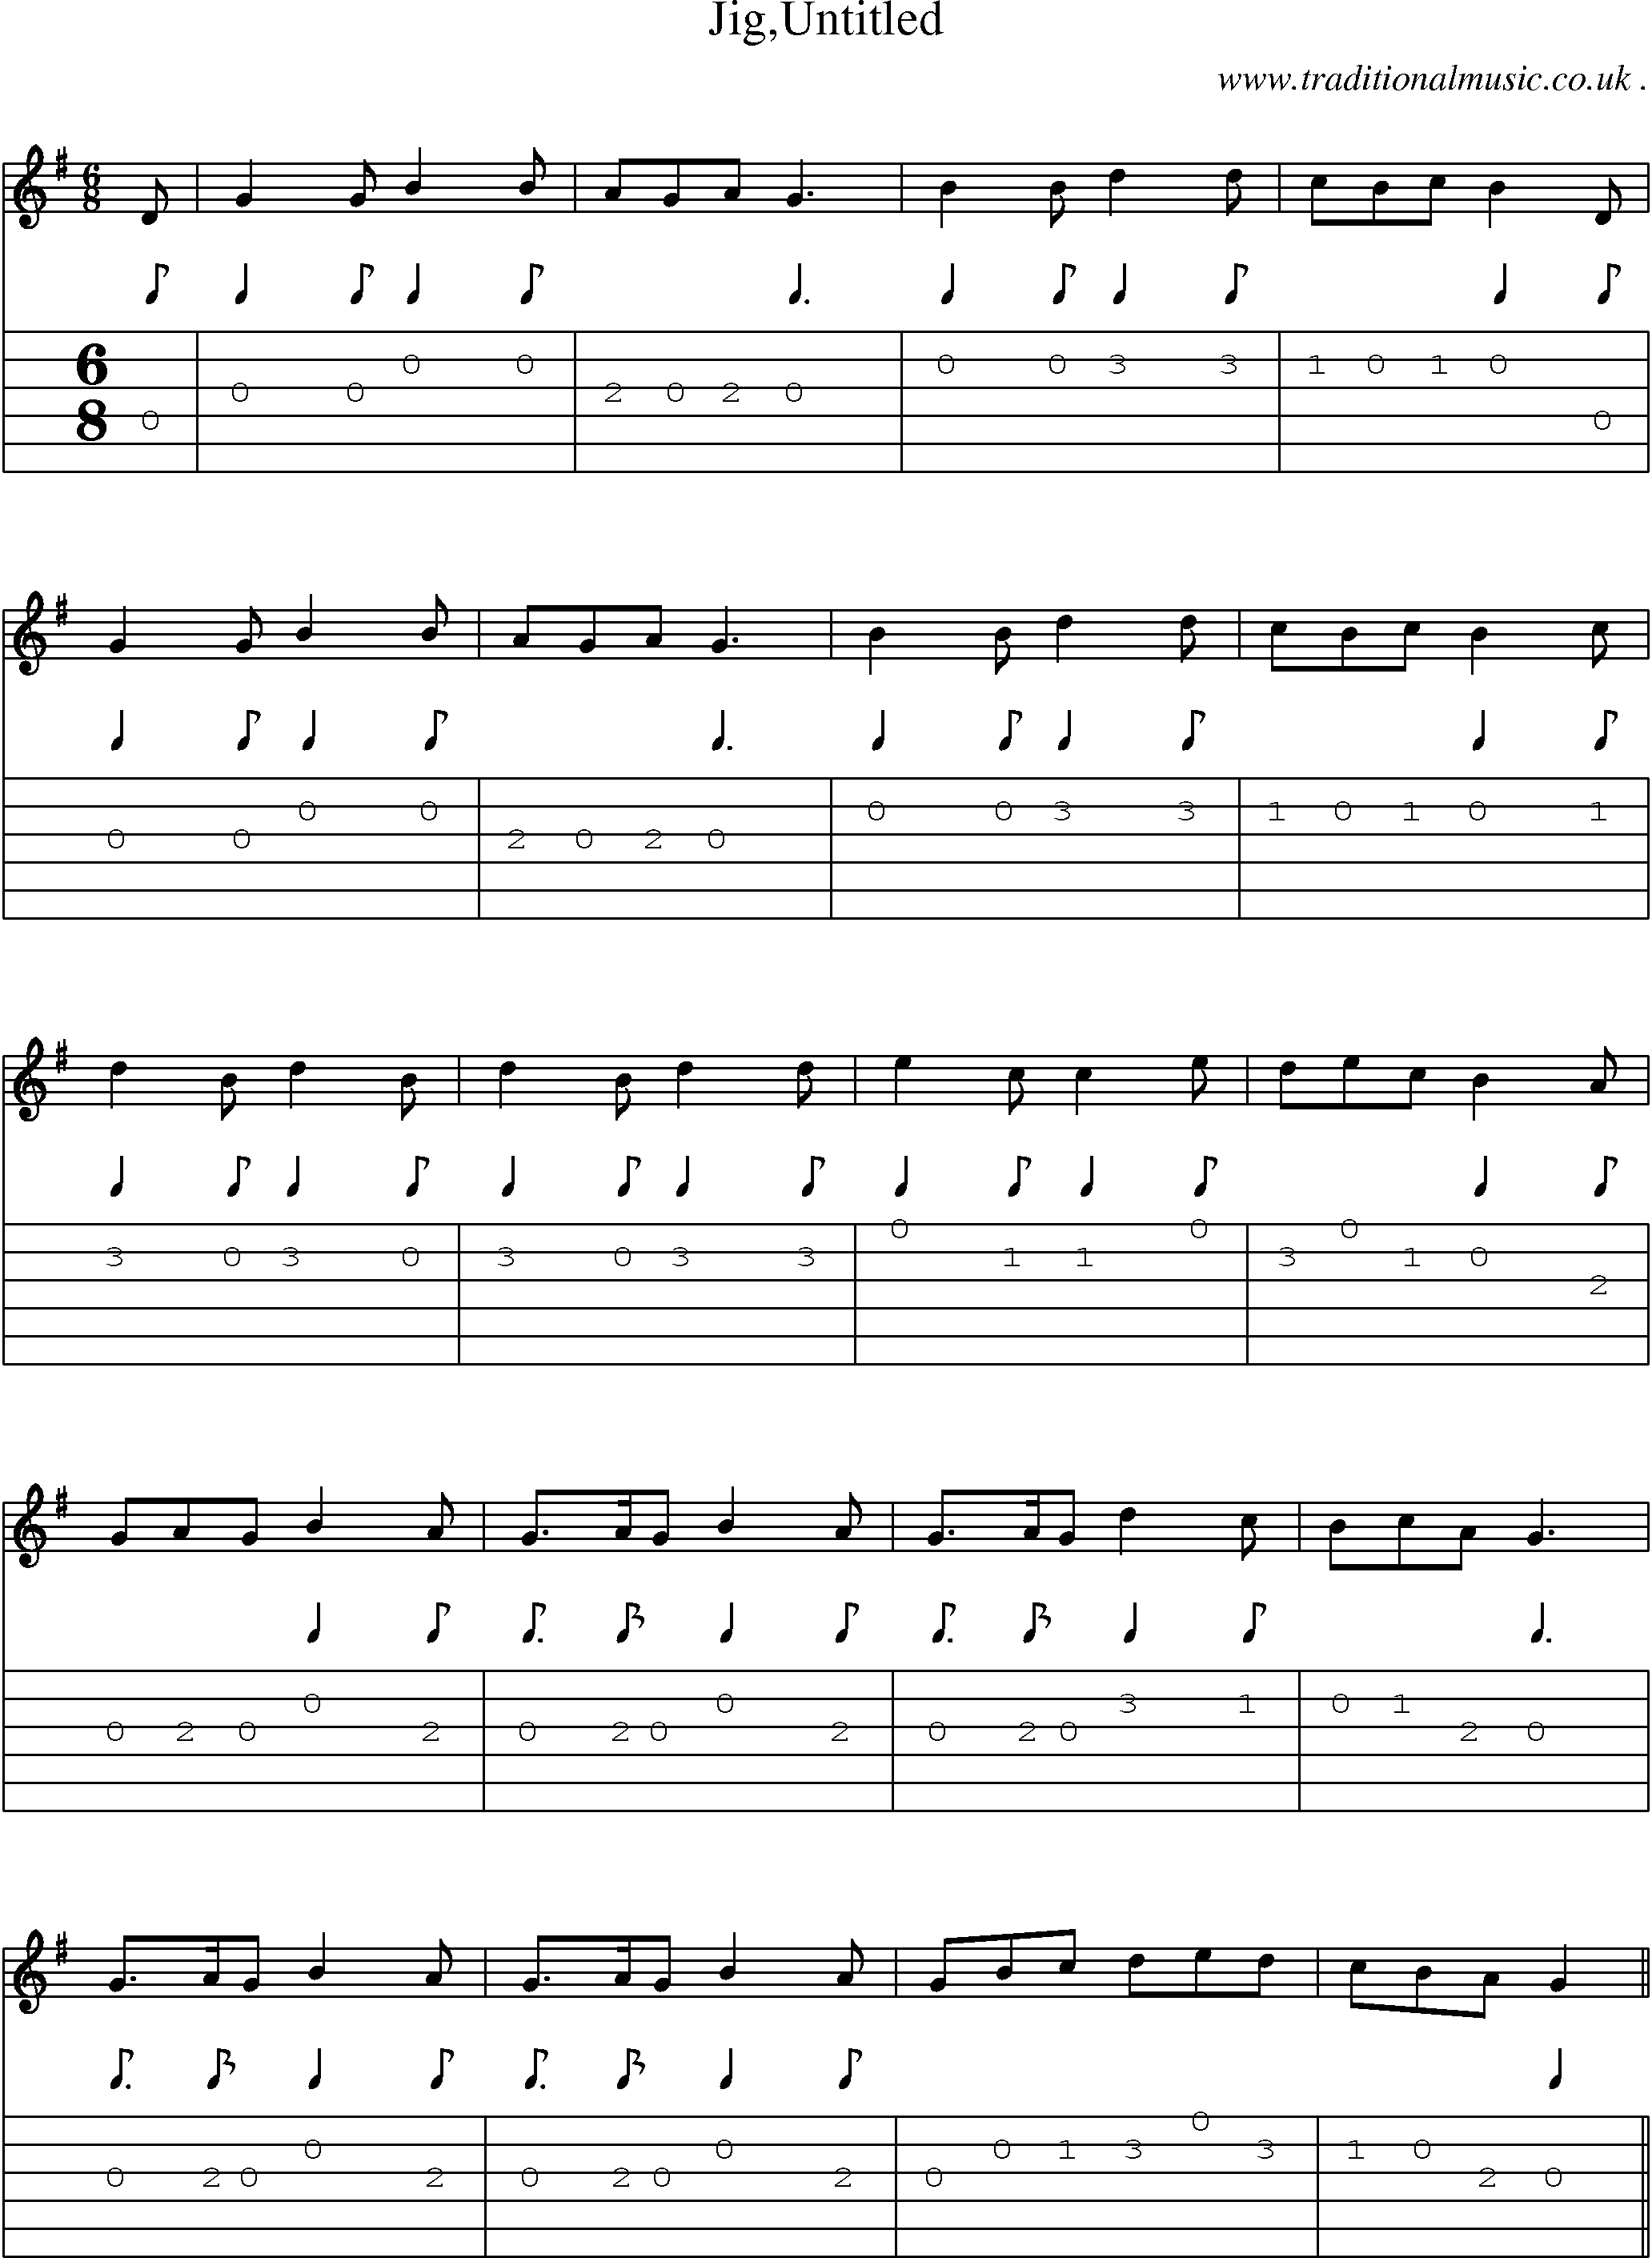 Sheet-Music and Guitar Tabs for Jiguntitled